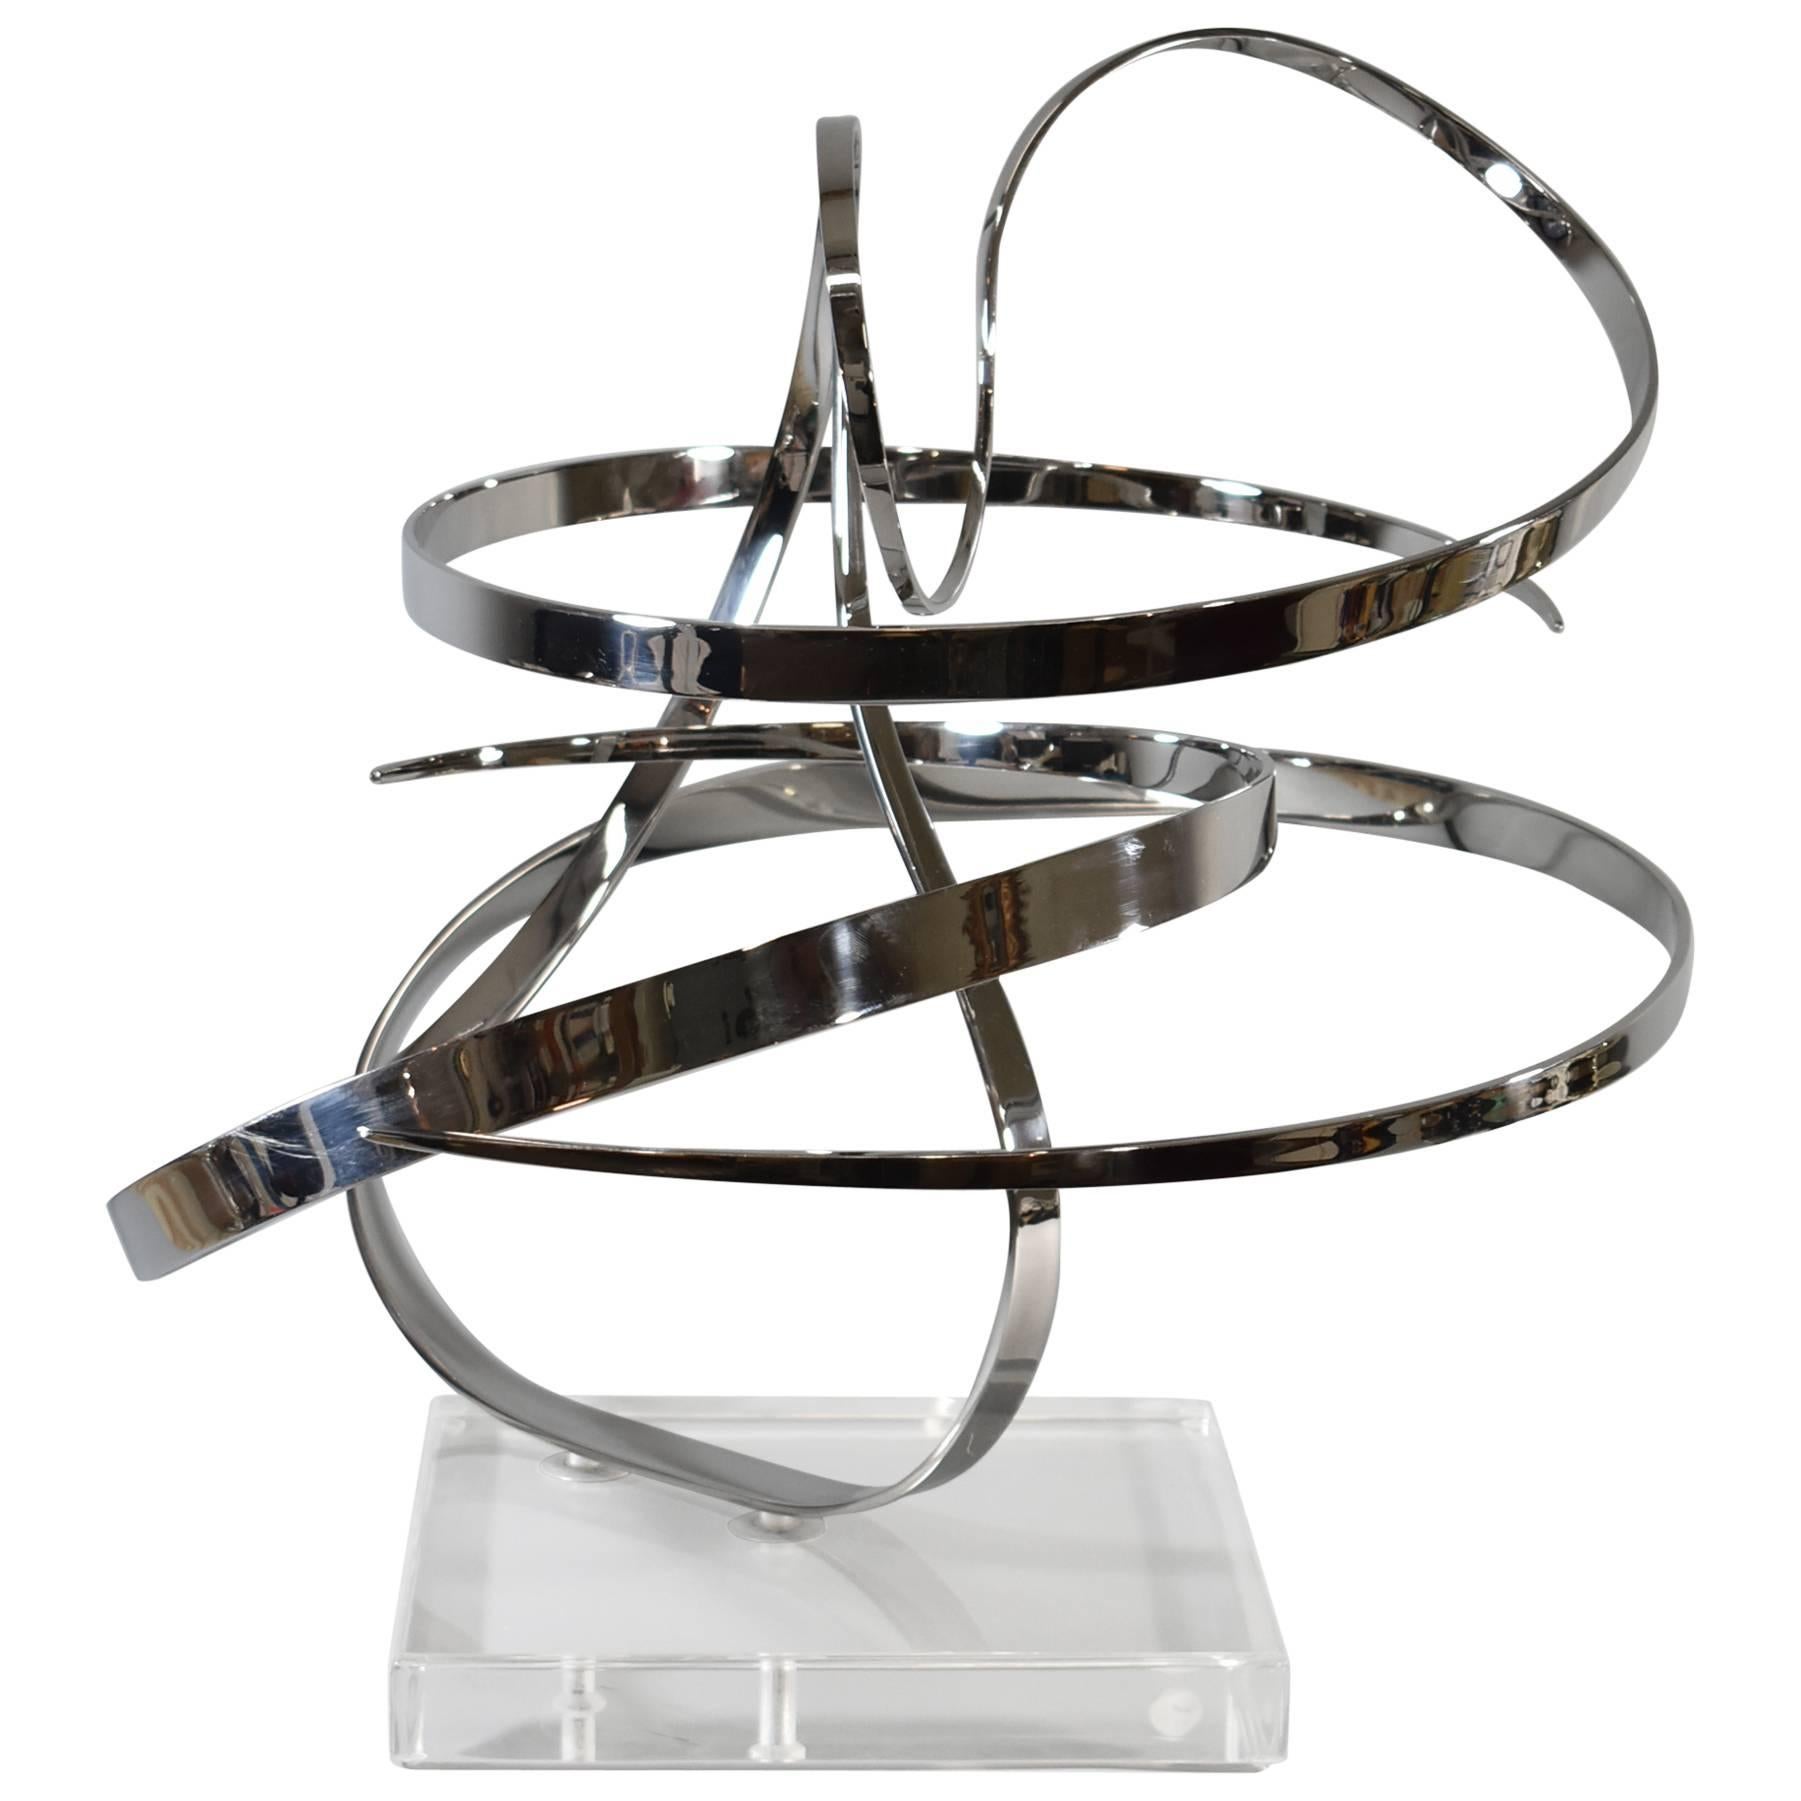 George Beckman Stainless Steel Kinetic Sculpture "Counterpoint"